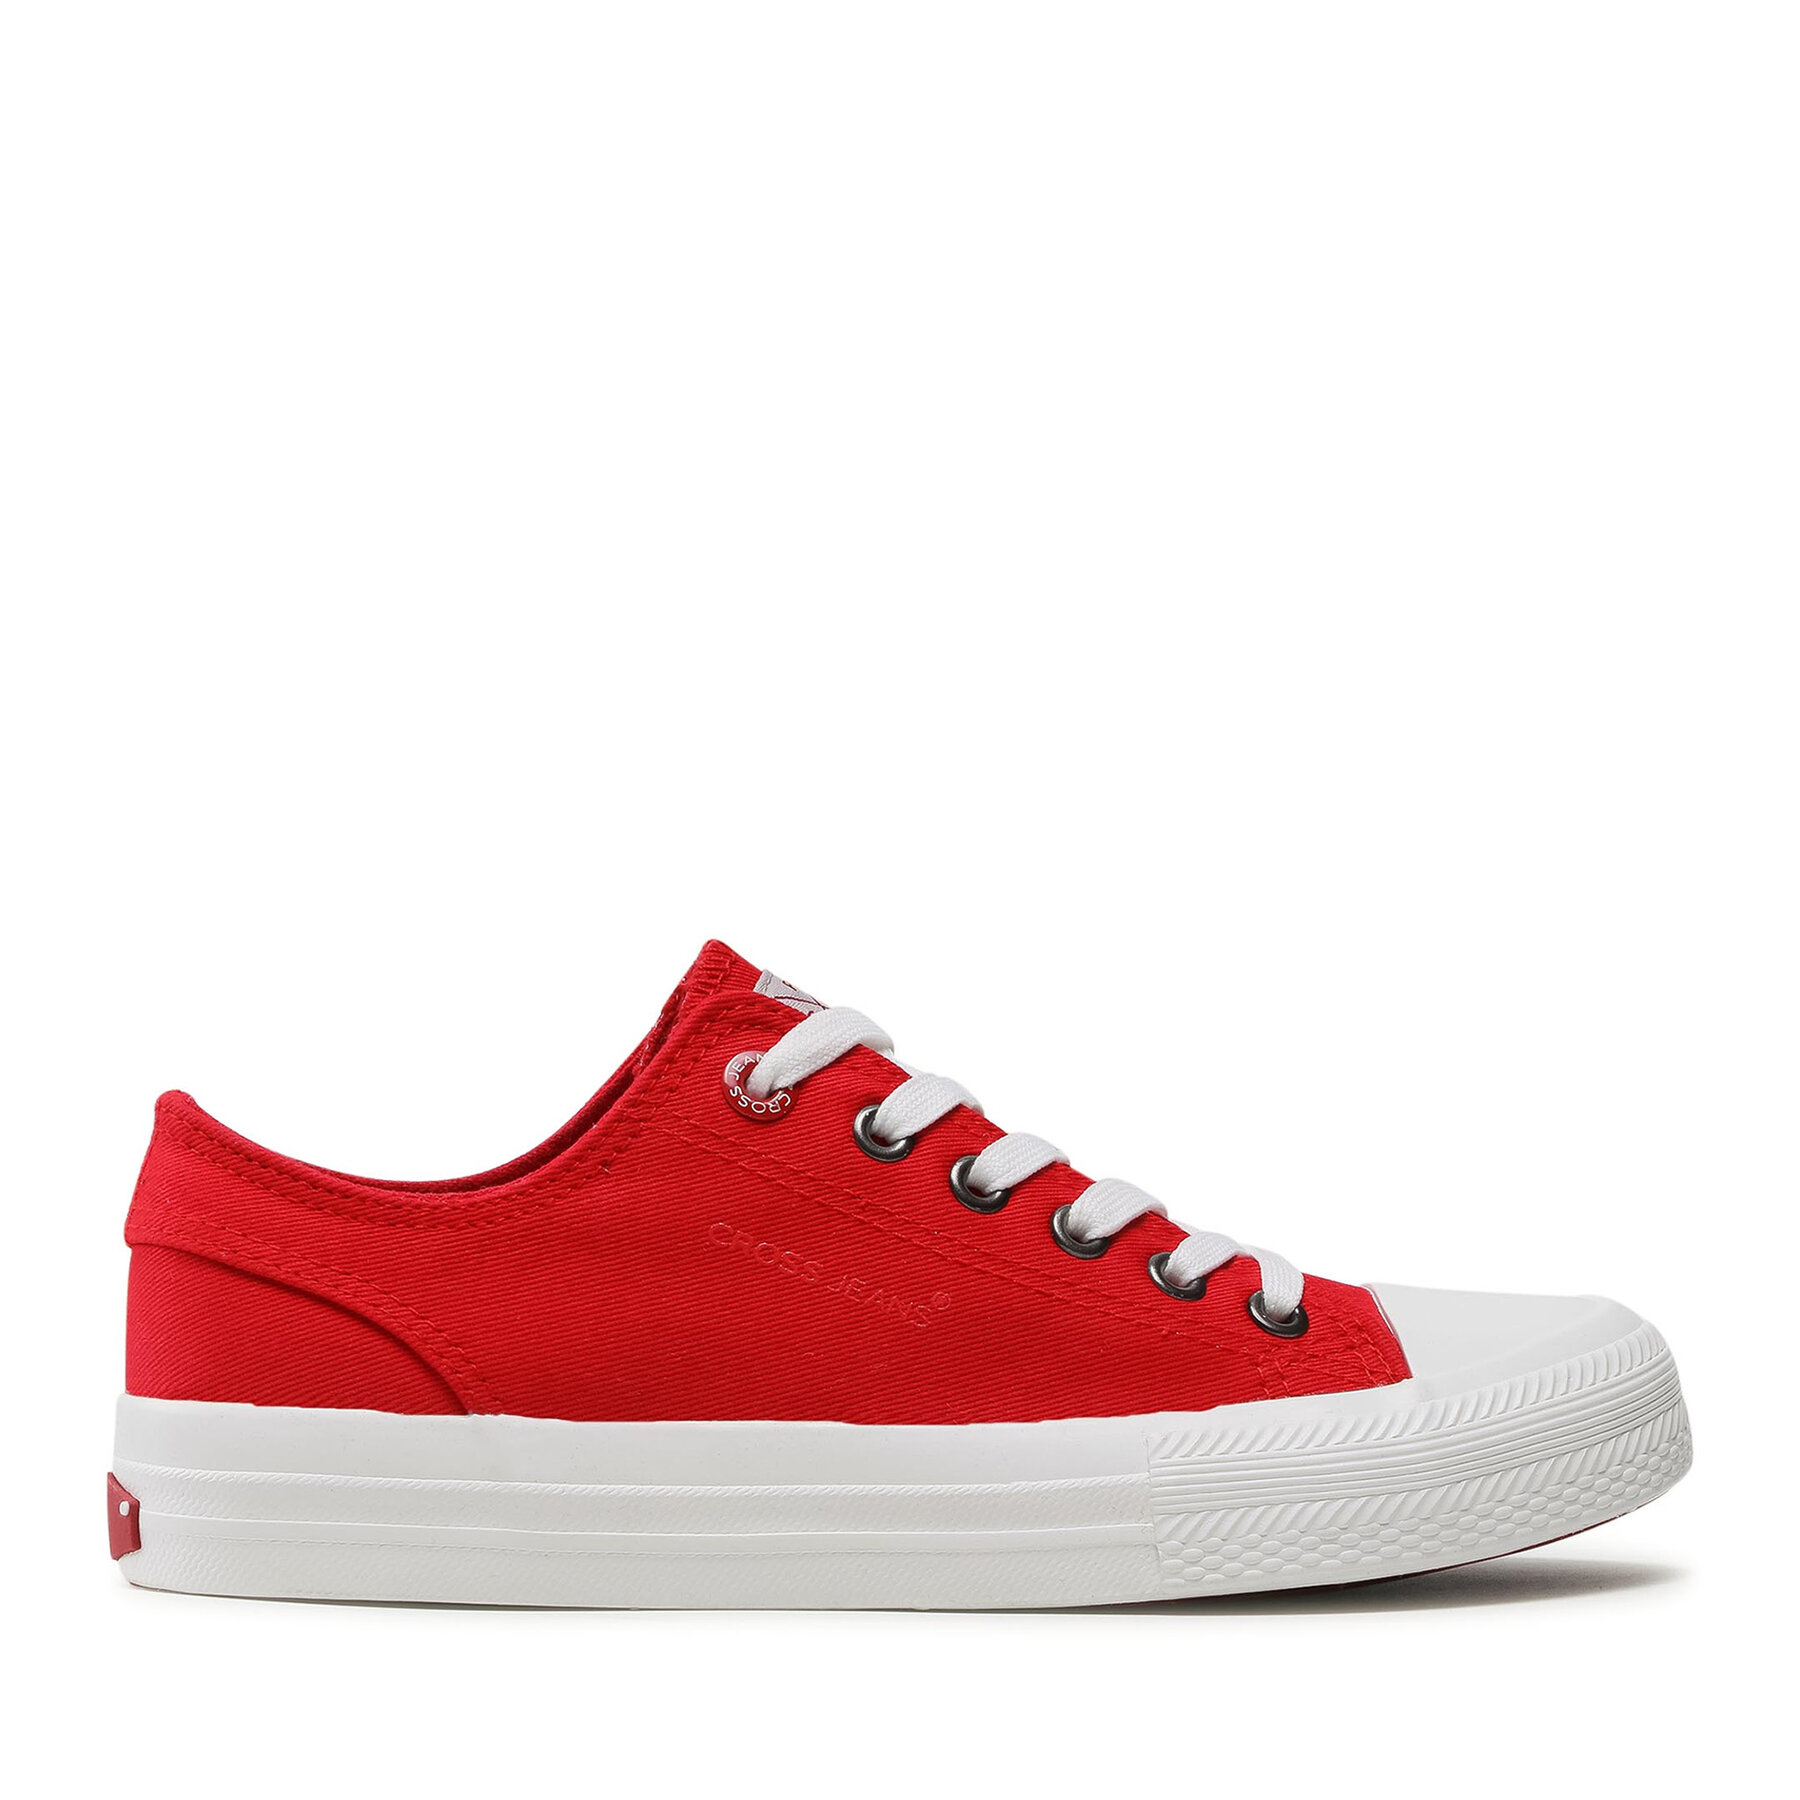 Sneakers aus Stoff Cross Jeans HH2R4020C Red von cross jeans